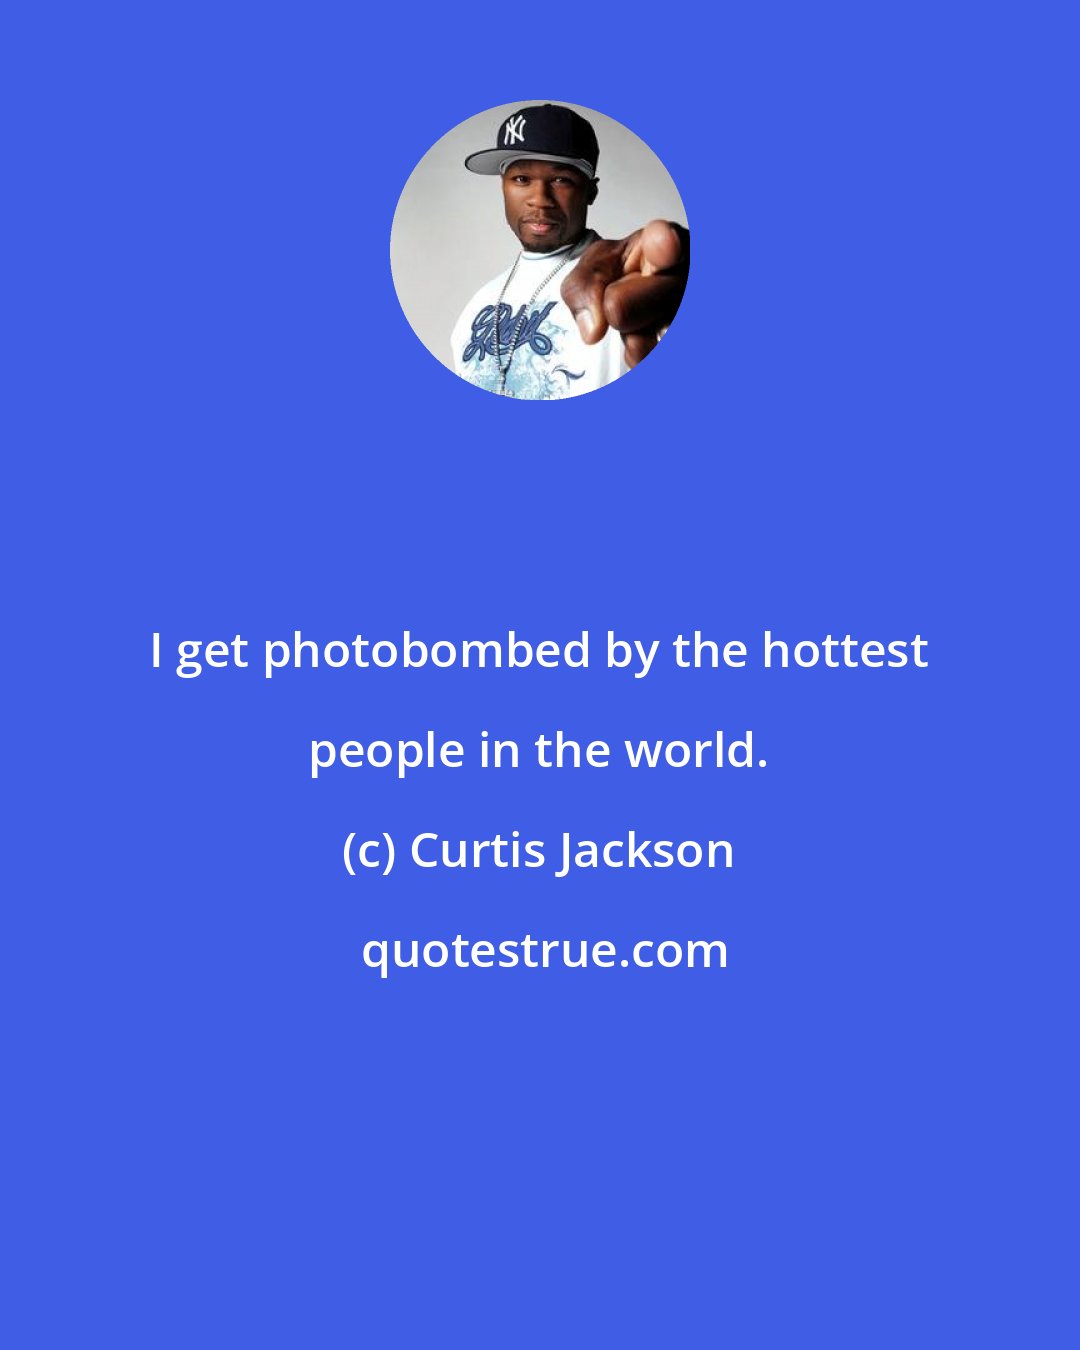 Curtis Jackson: I get photobombed by the hottest people in the world.